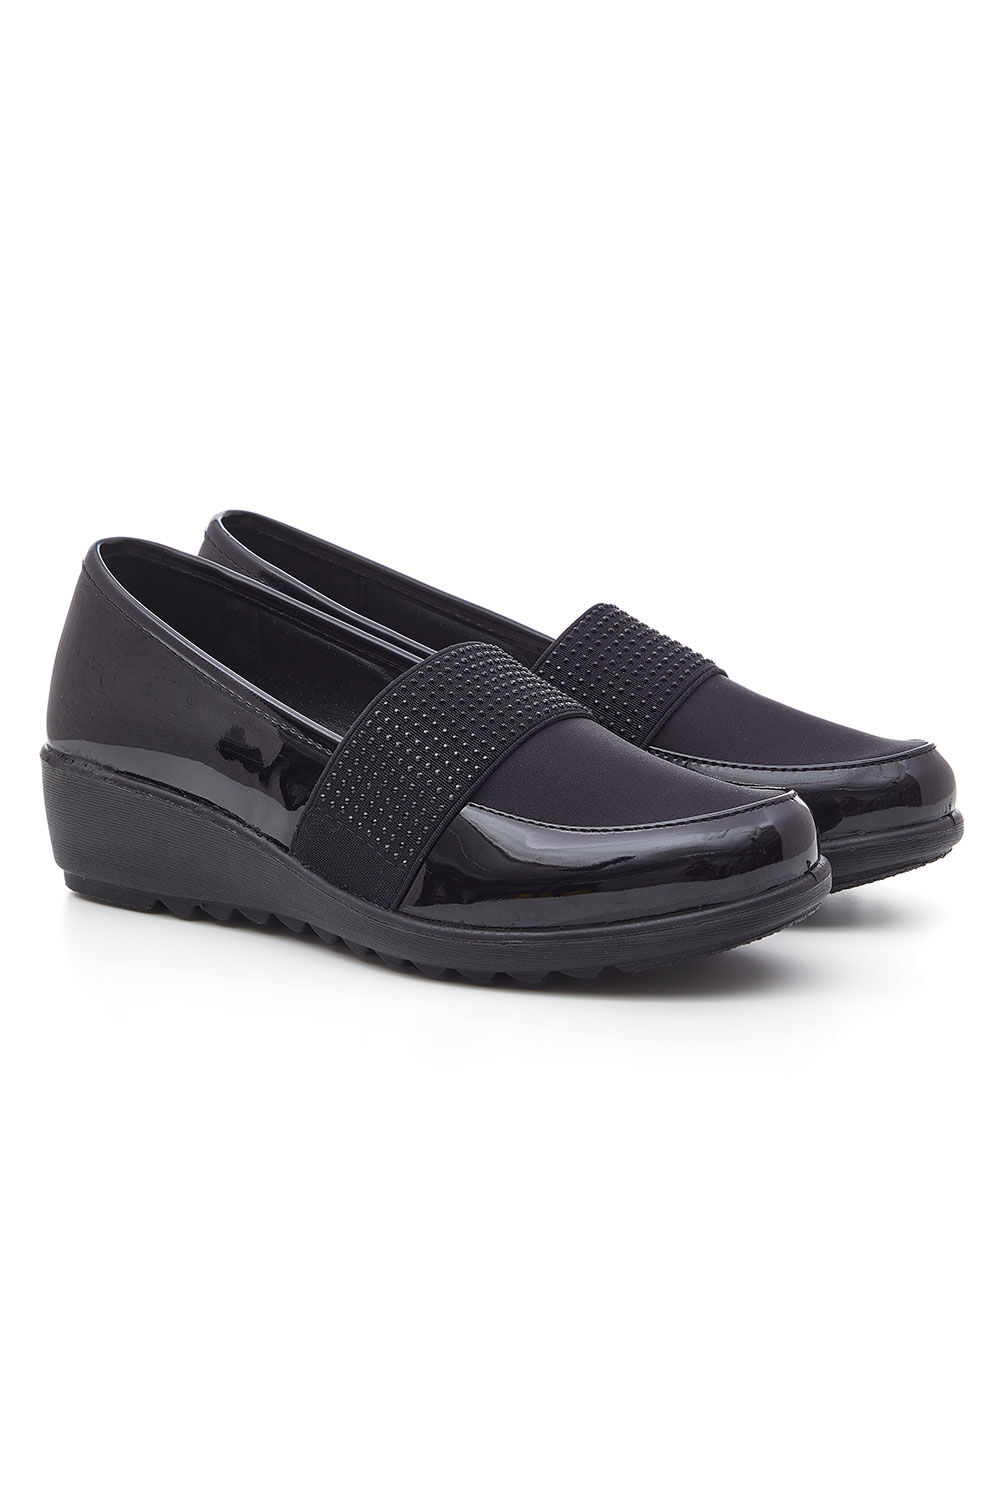 Cushion Walk Black - Patent Shoes With Fabric Front and Diamante Detail, Size: 3